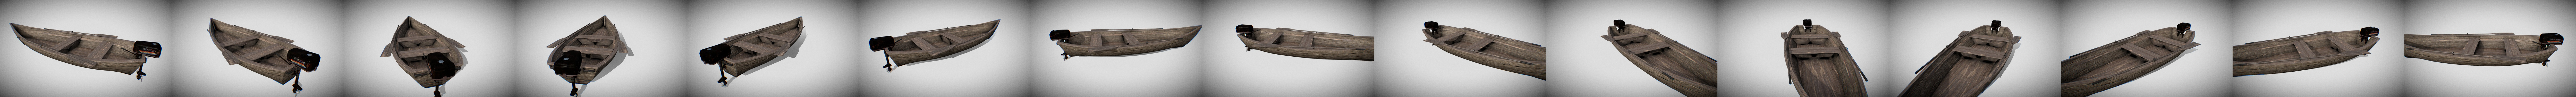 Wooden Boat Old - Buy Royalty Free 3D model by Evrika153